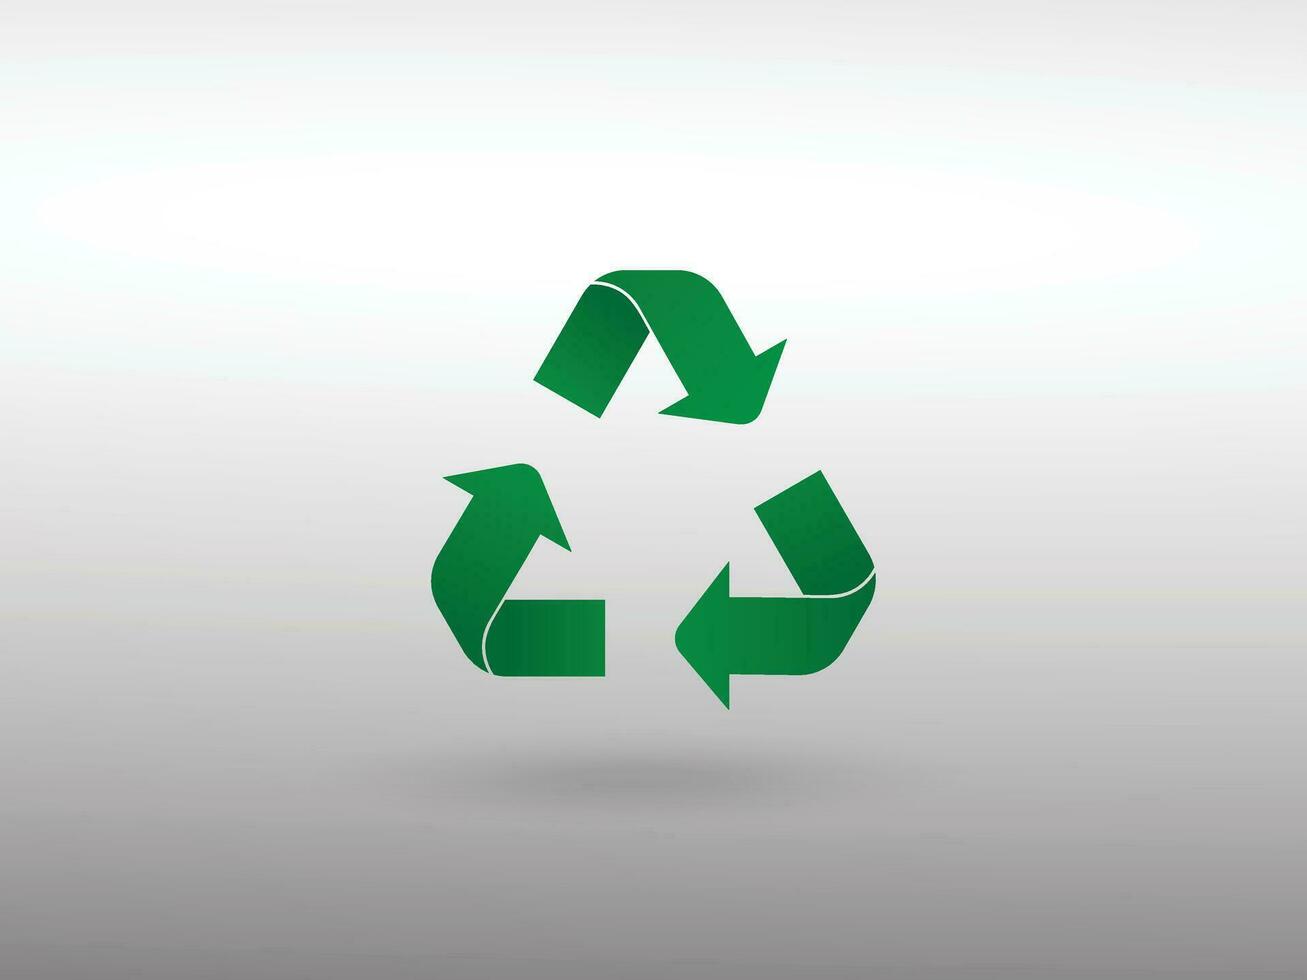 recycle icoon symbool vector. recycling en omwenteling pijl icoon vector